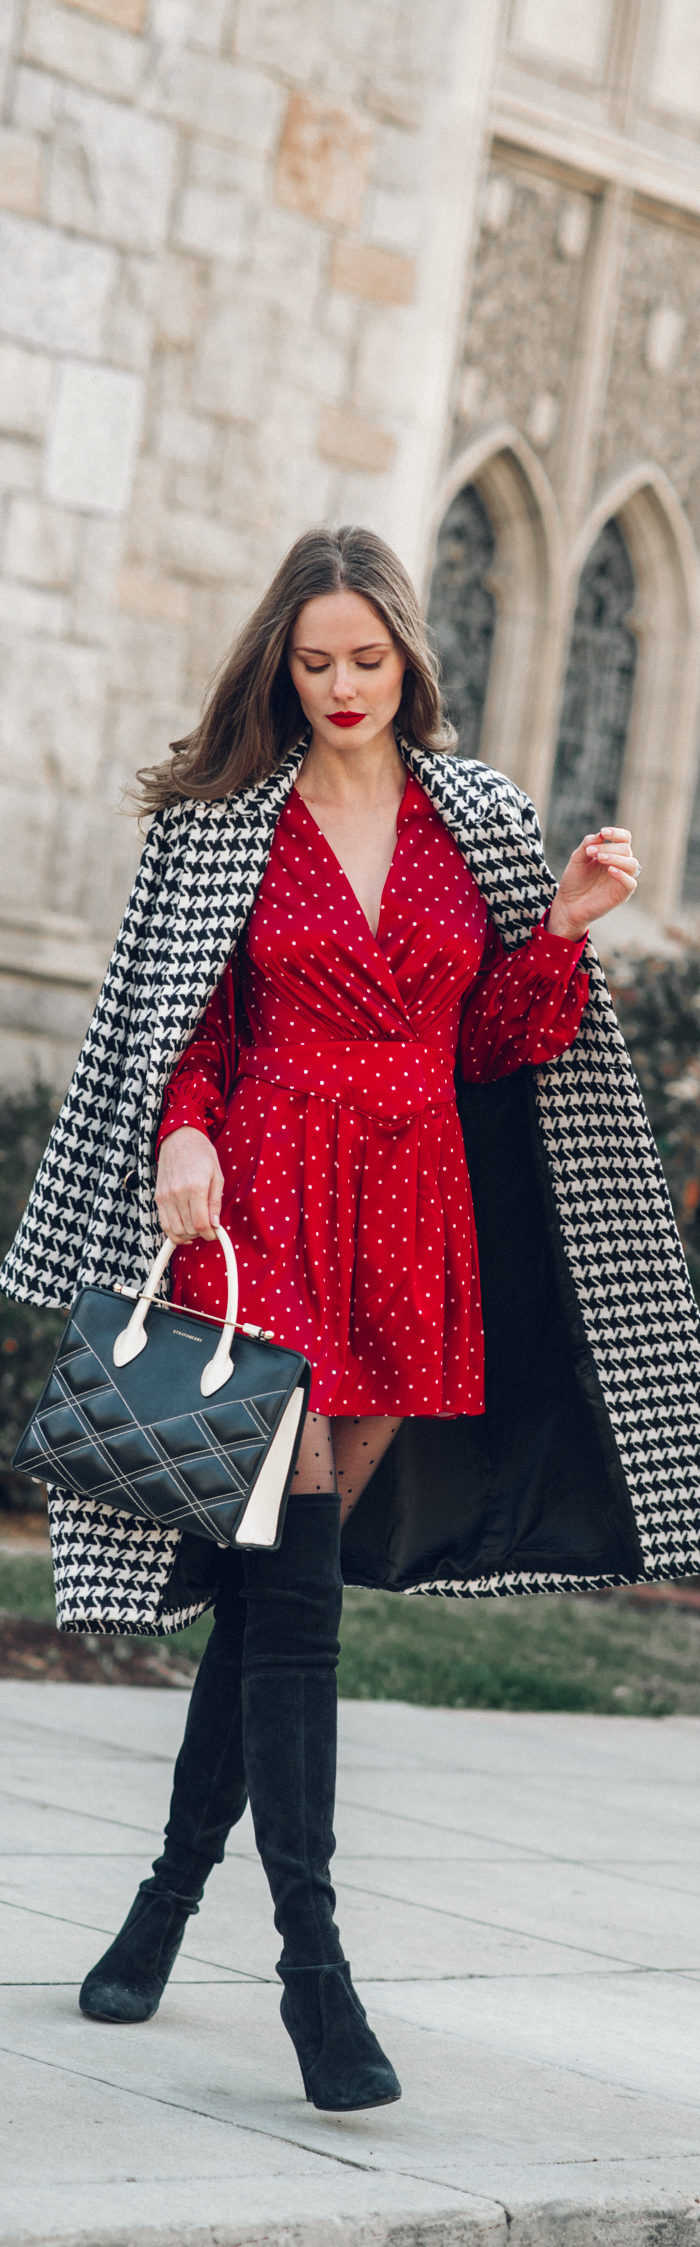 Alyssa Campanella of The A List blog shares her tricks for gorgeous hair wearing L'Academie Stella dress and Richard coat with Strathberry Midi Tote bag